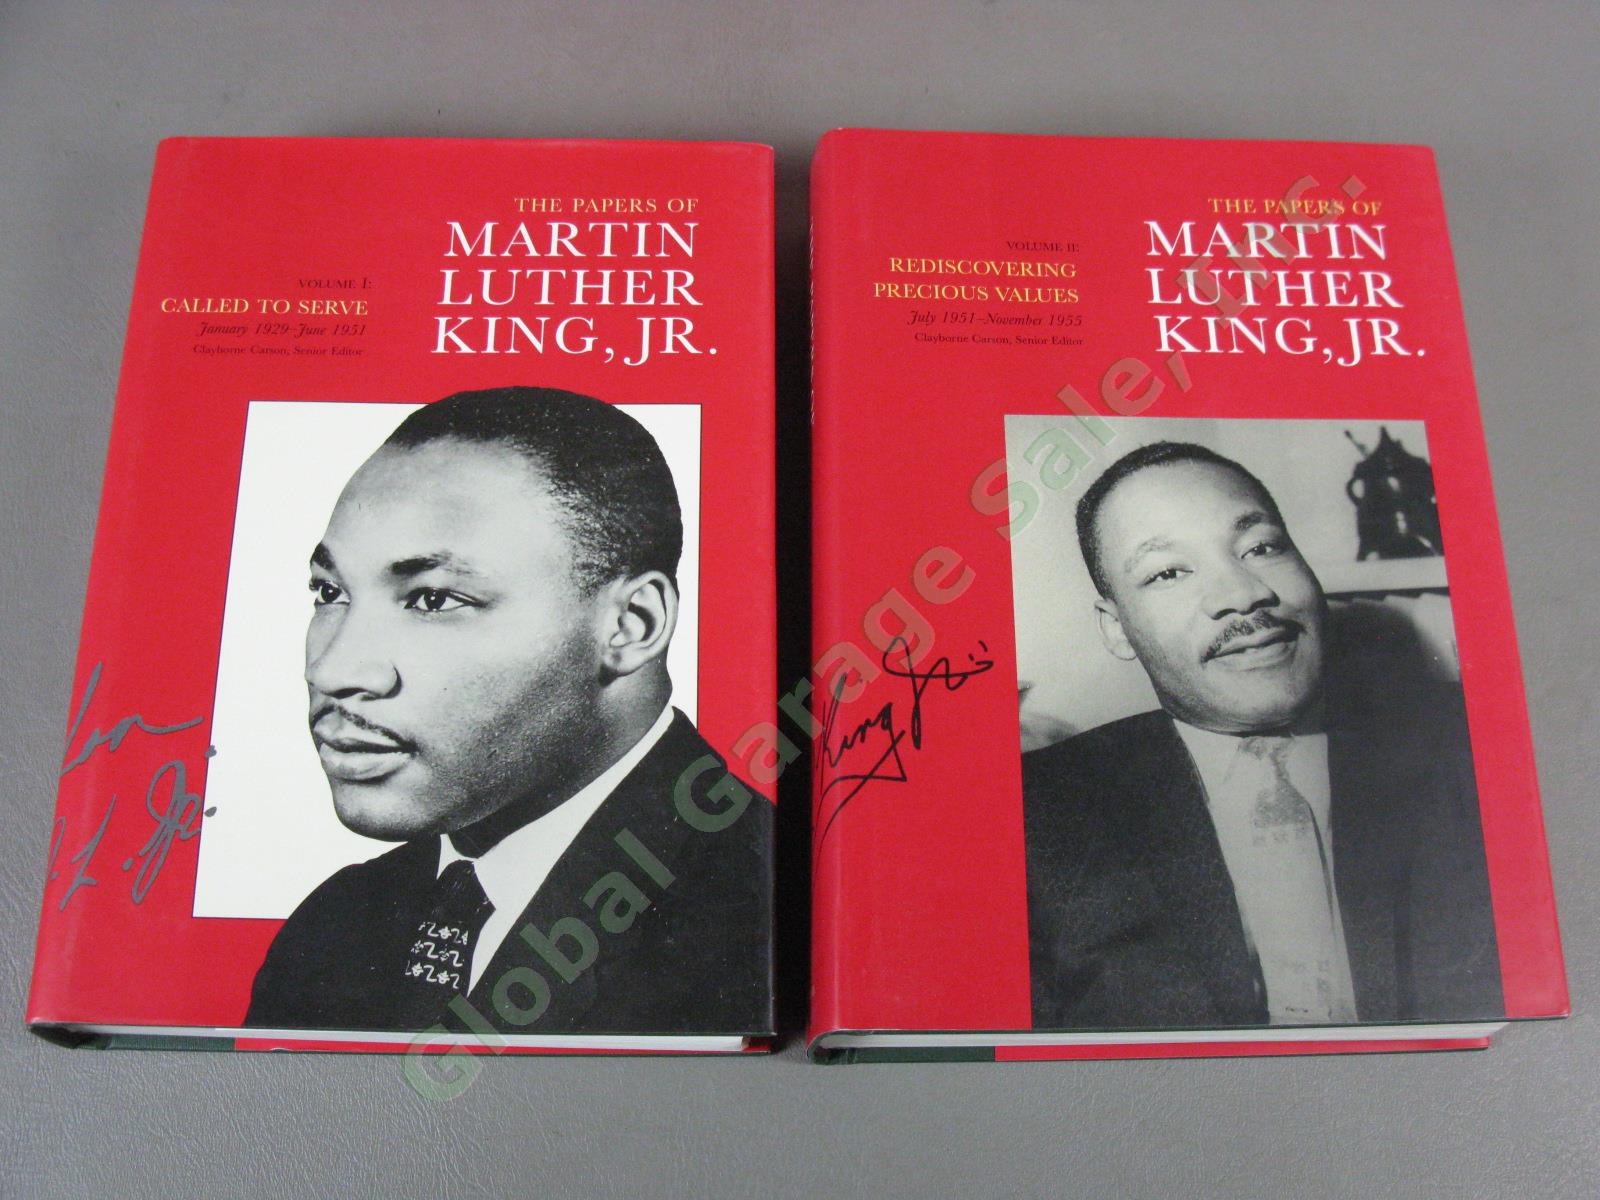 MINT! Never Read! Papers of Martin Luther King Jr Volumes I-VII Rare Full Set! 1